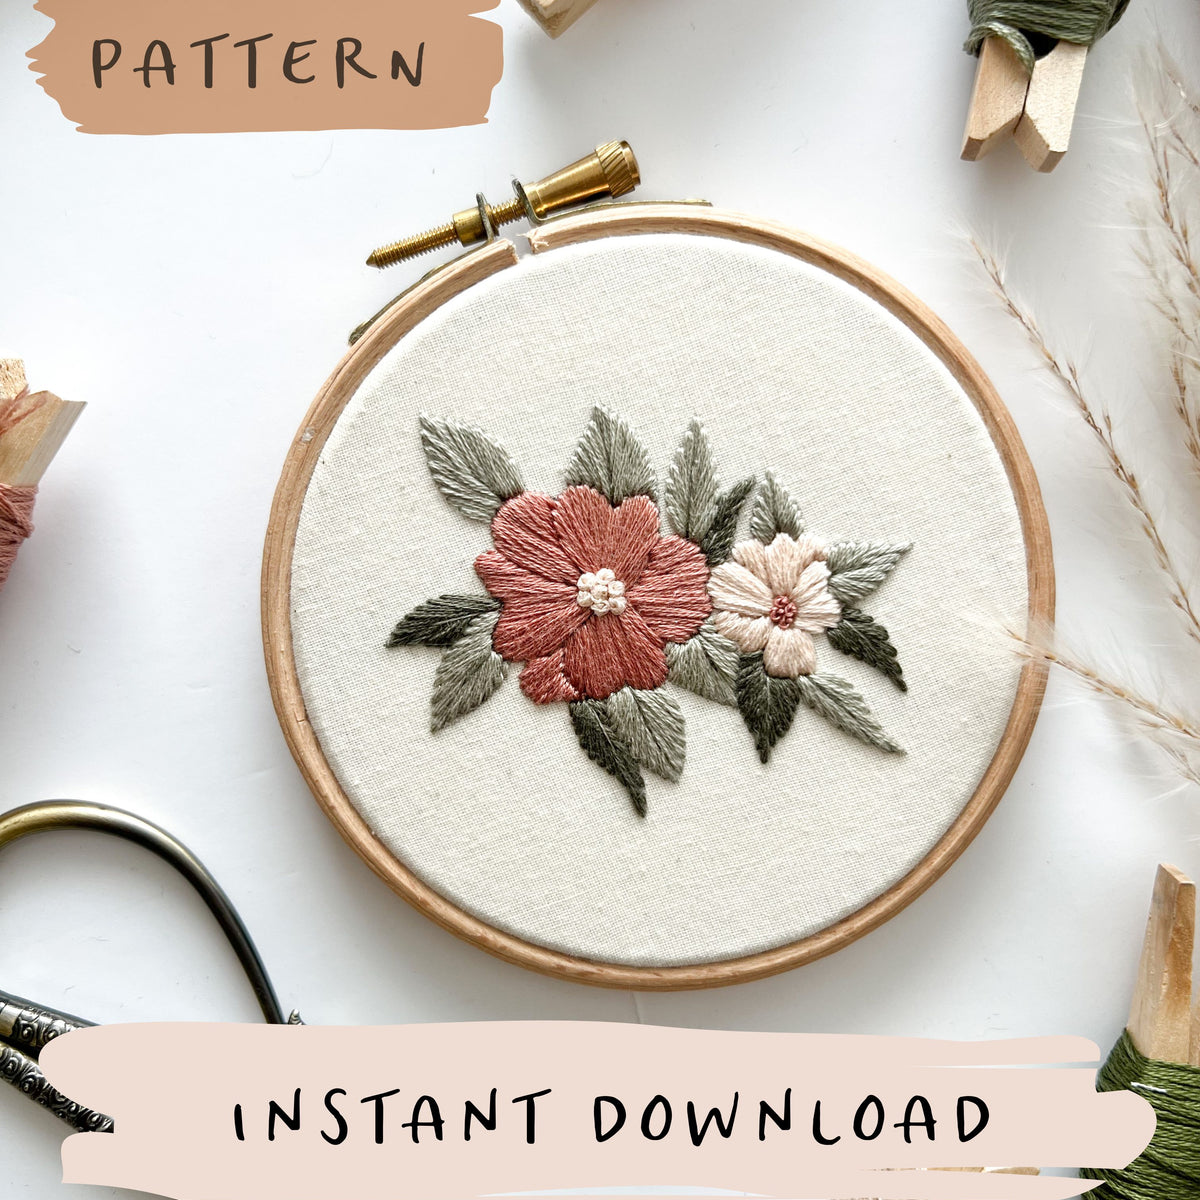 Flower Embroidery Pattern Butterfly Hand Embroidery Flower and Butterfly  Hoop Art Beginner Embroidery PDF Pattern Instant Download -  Israel